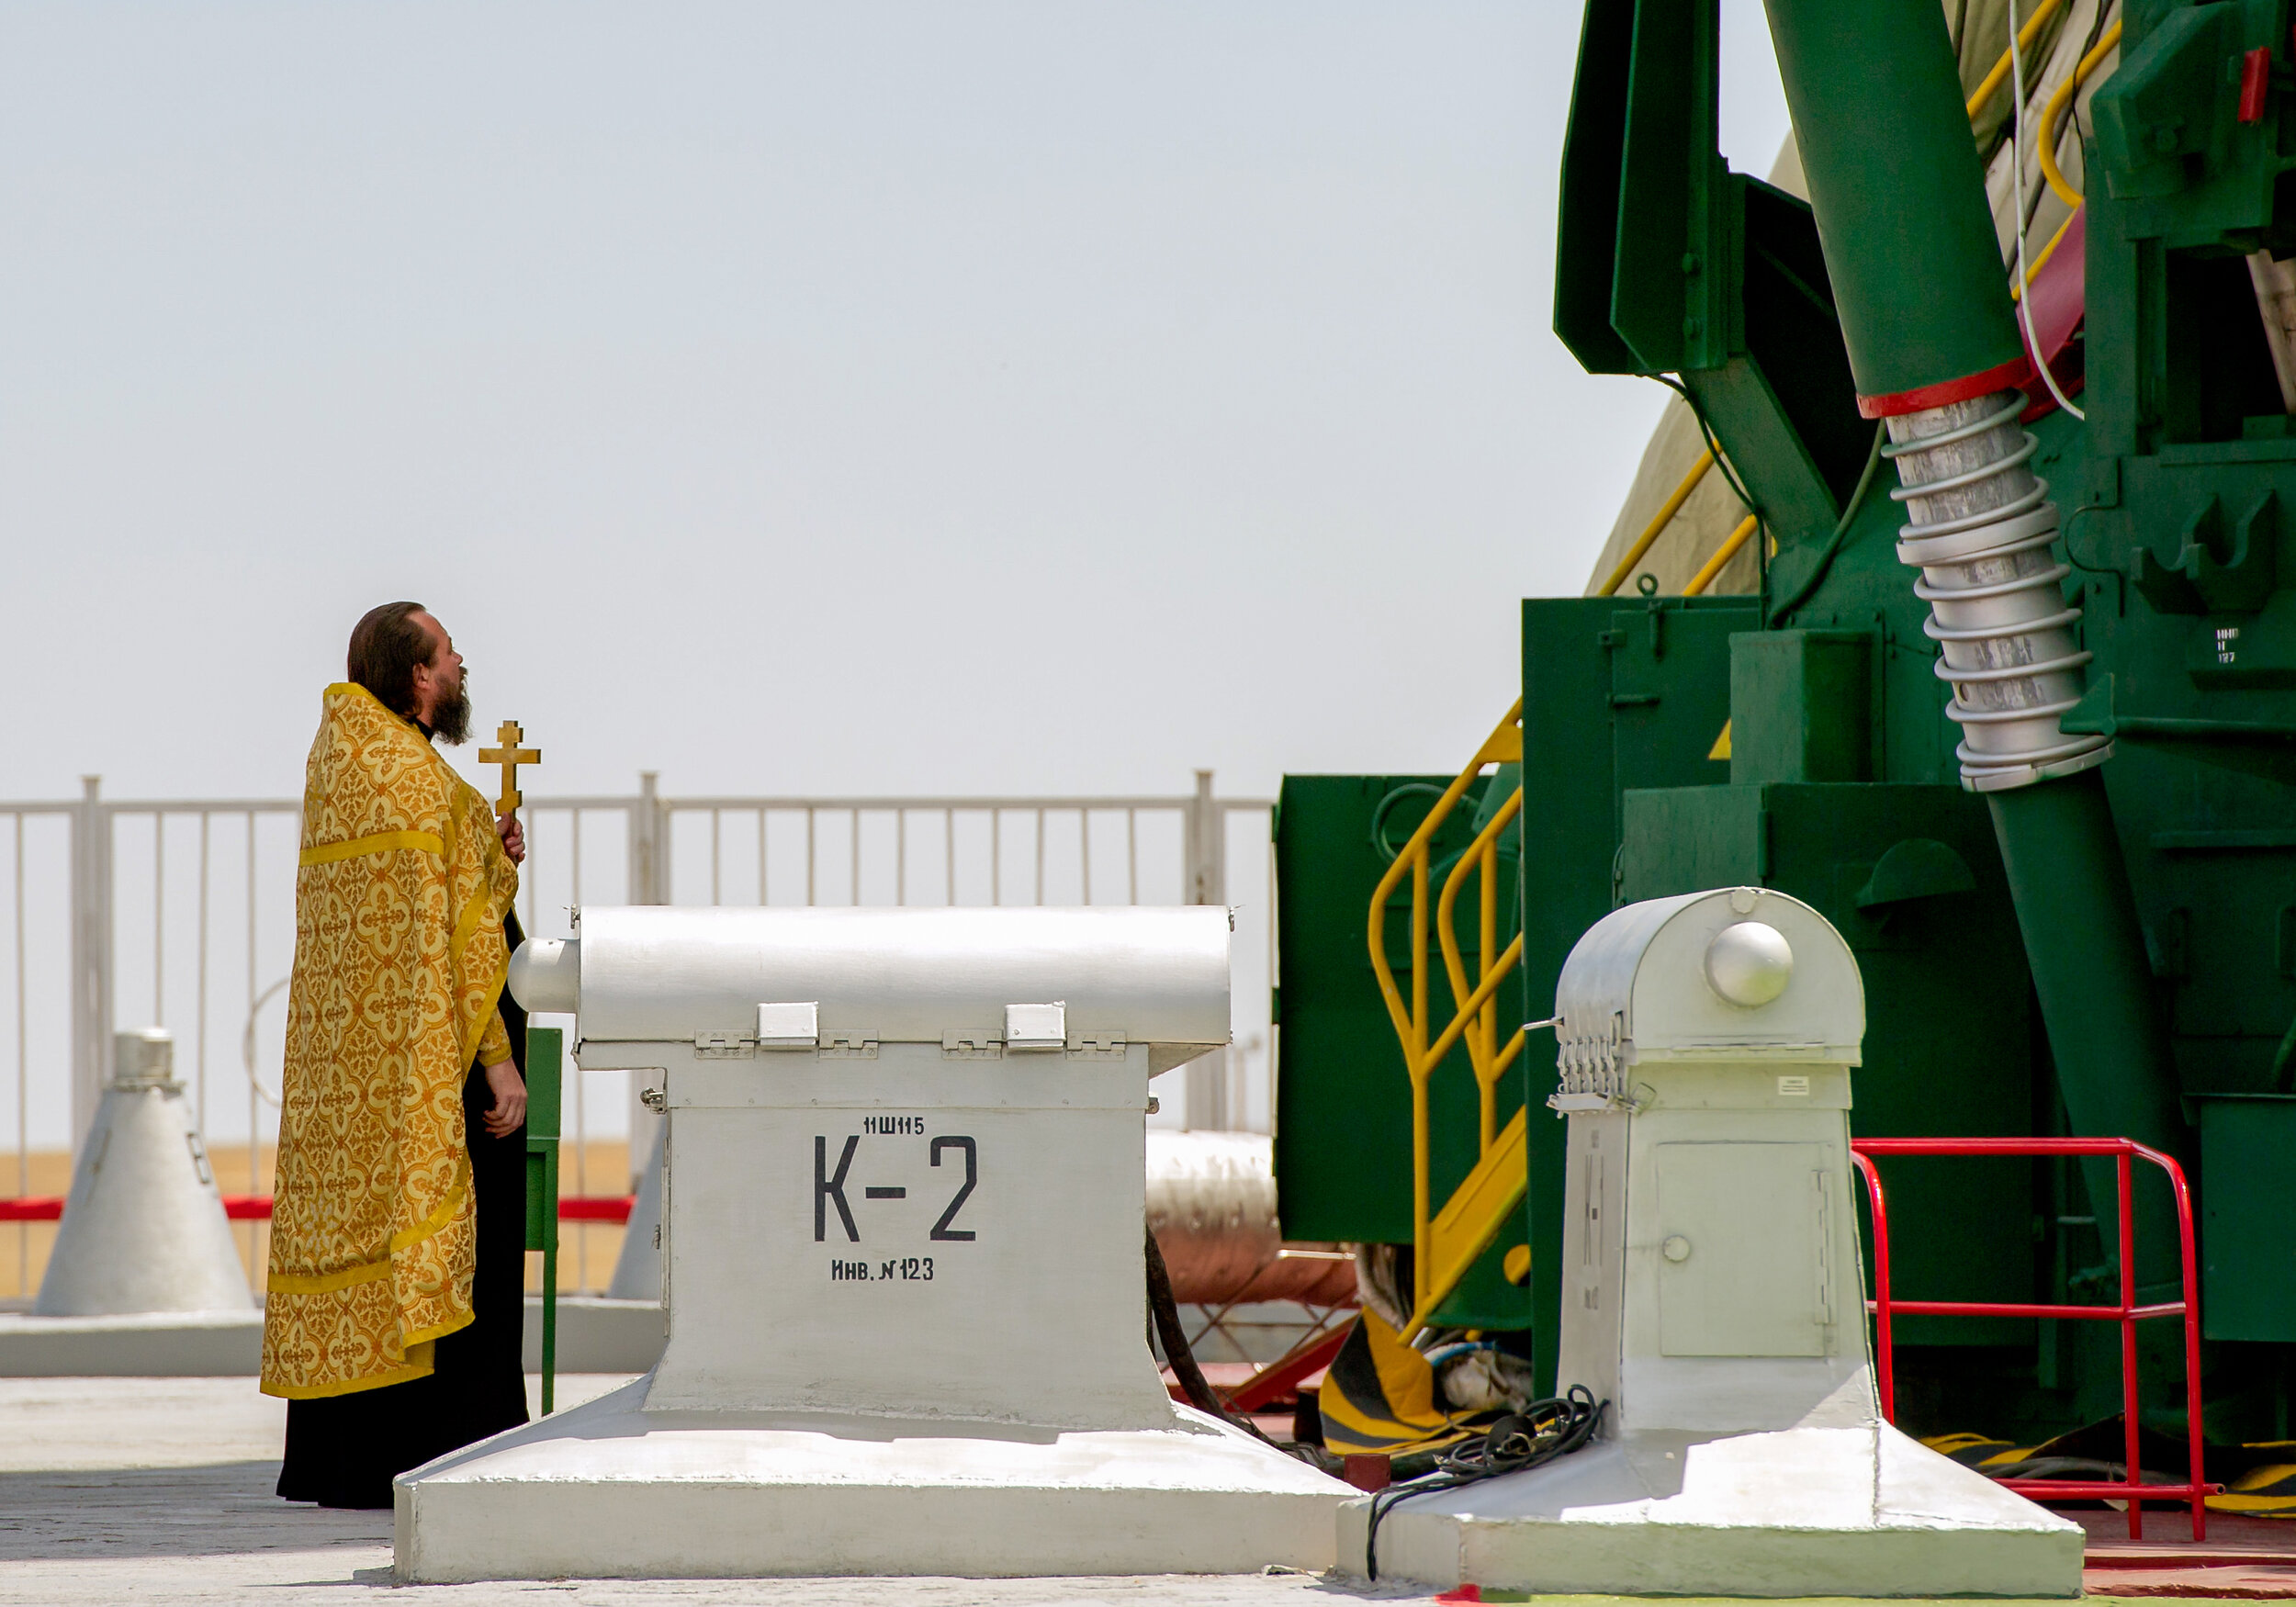  An Orthodox priest blesses the Soyuz rocket at the Baikonur Cosmodrome Launch pad on Friday, July 13, 2012 in Kazakhstan. The launch of the Soyuz spacecraft with Expedition 32 Soyuz Commander Yuri Malenchenko, NASA Flight Engineer Sunita Williams an